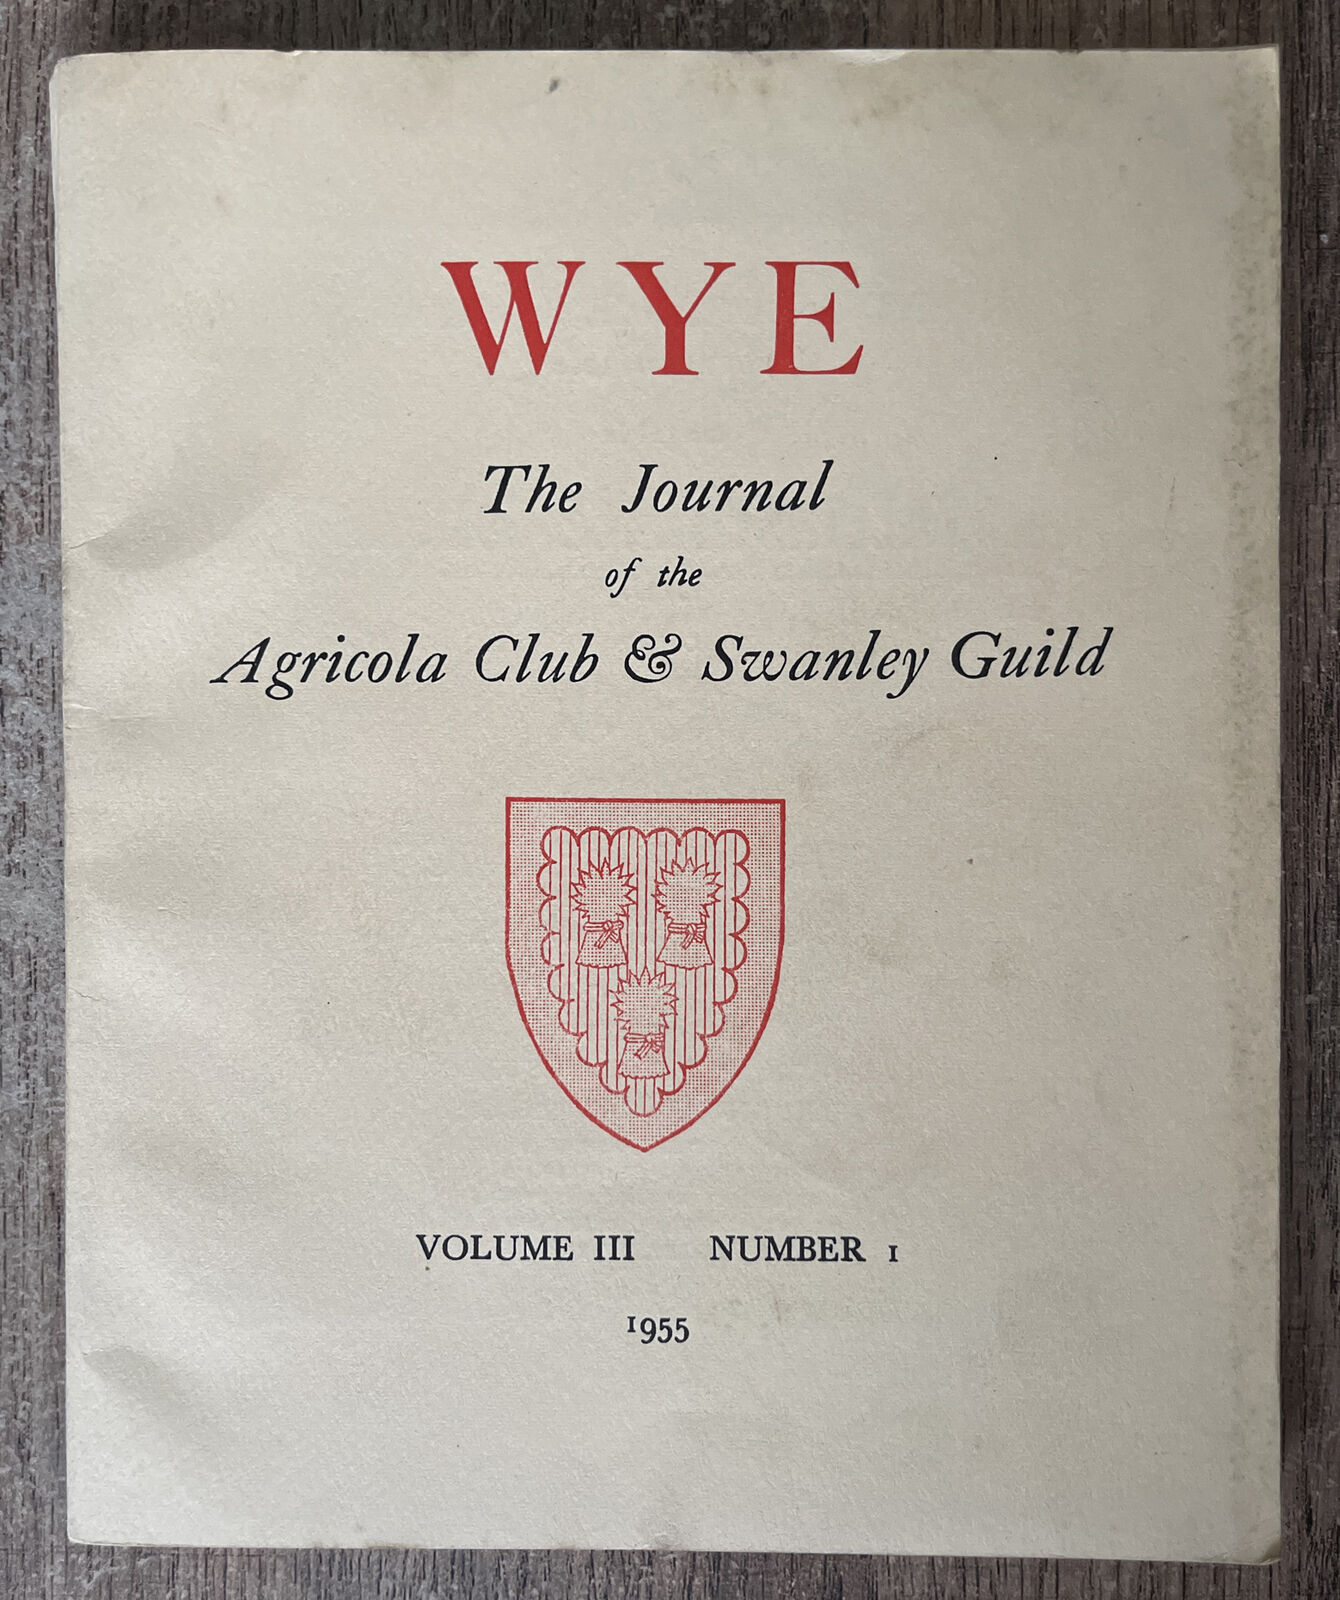 WYE - The Journal of the Agricola Club & Swanley Guild. Vol 3,No 1, 1955